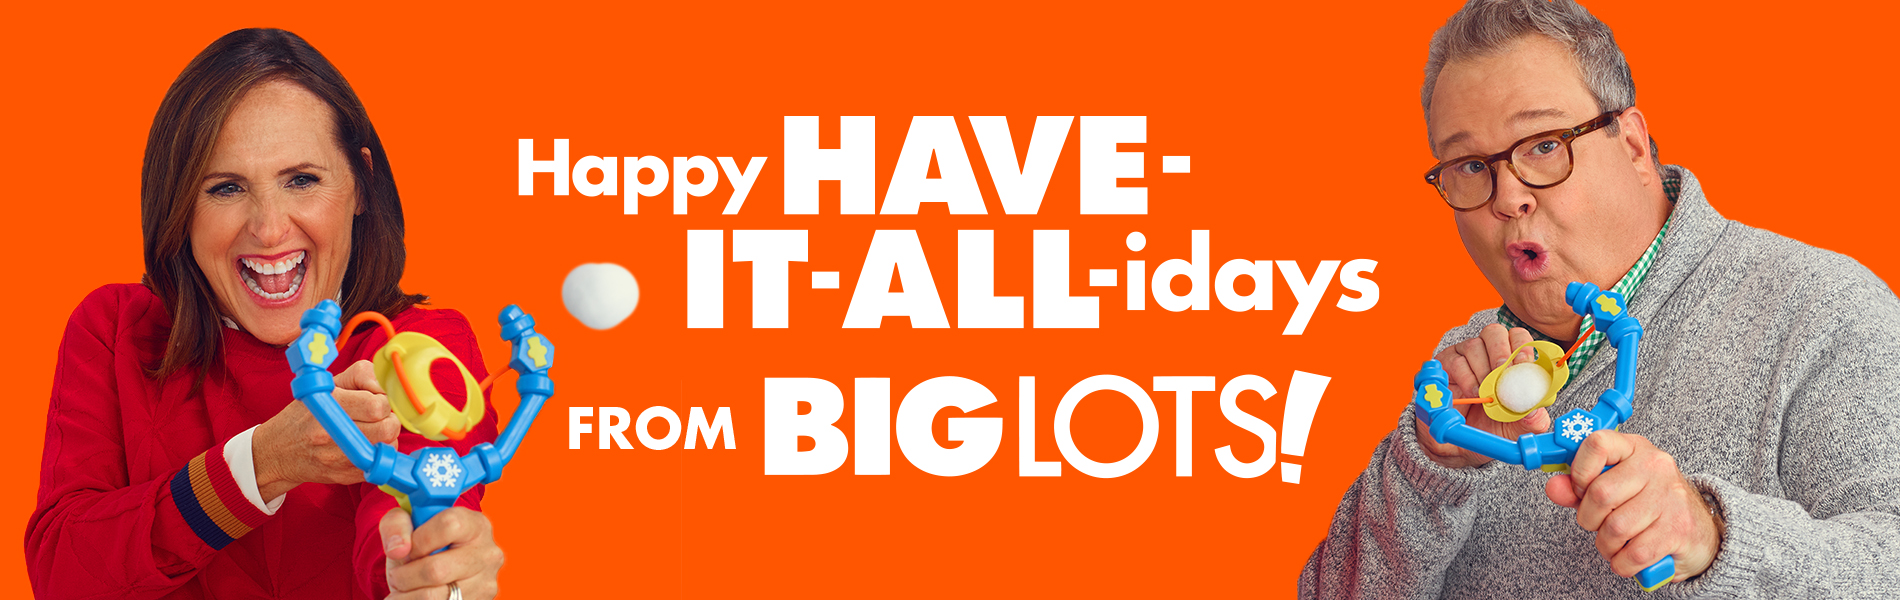 Happy Have-it-all-idays from Big Lots!